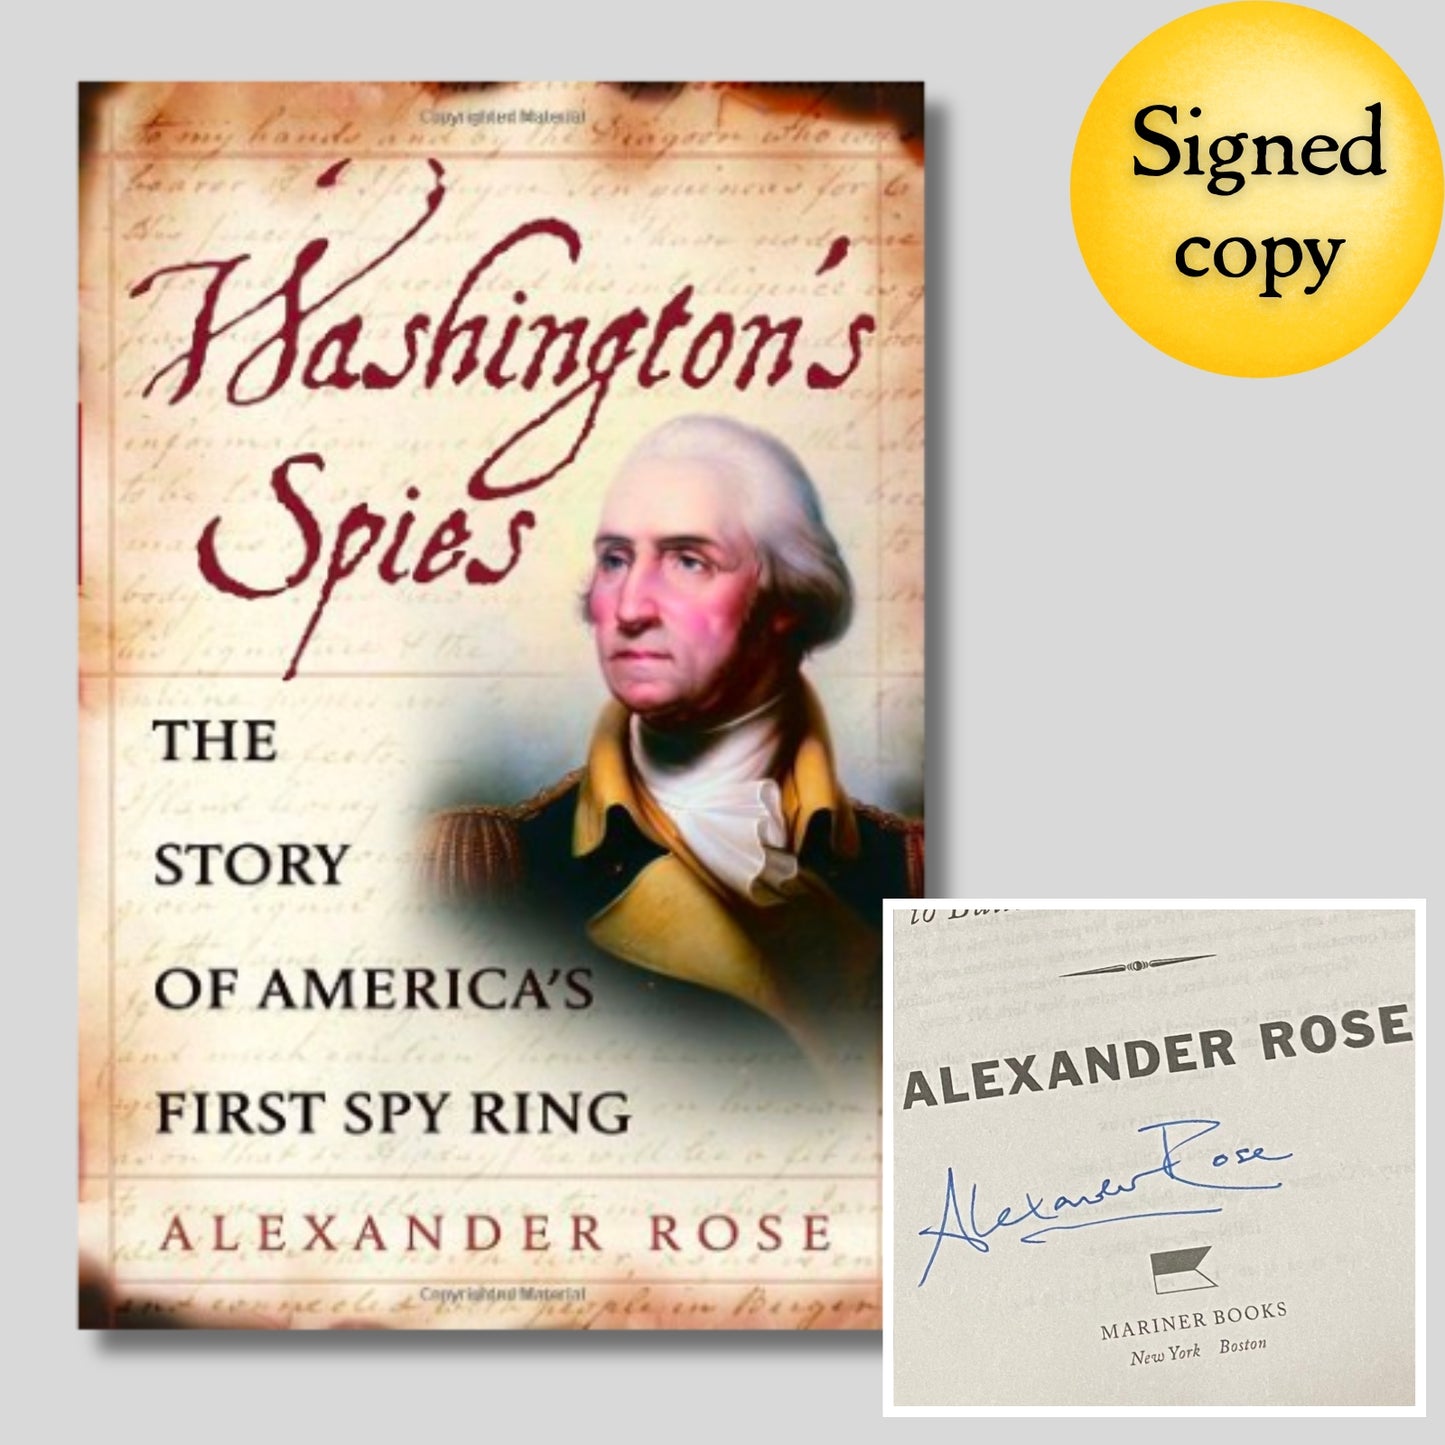 "Washington's Spies: The Story of America's First Spy Ring" - Signed by the author Alexander Rose